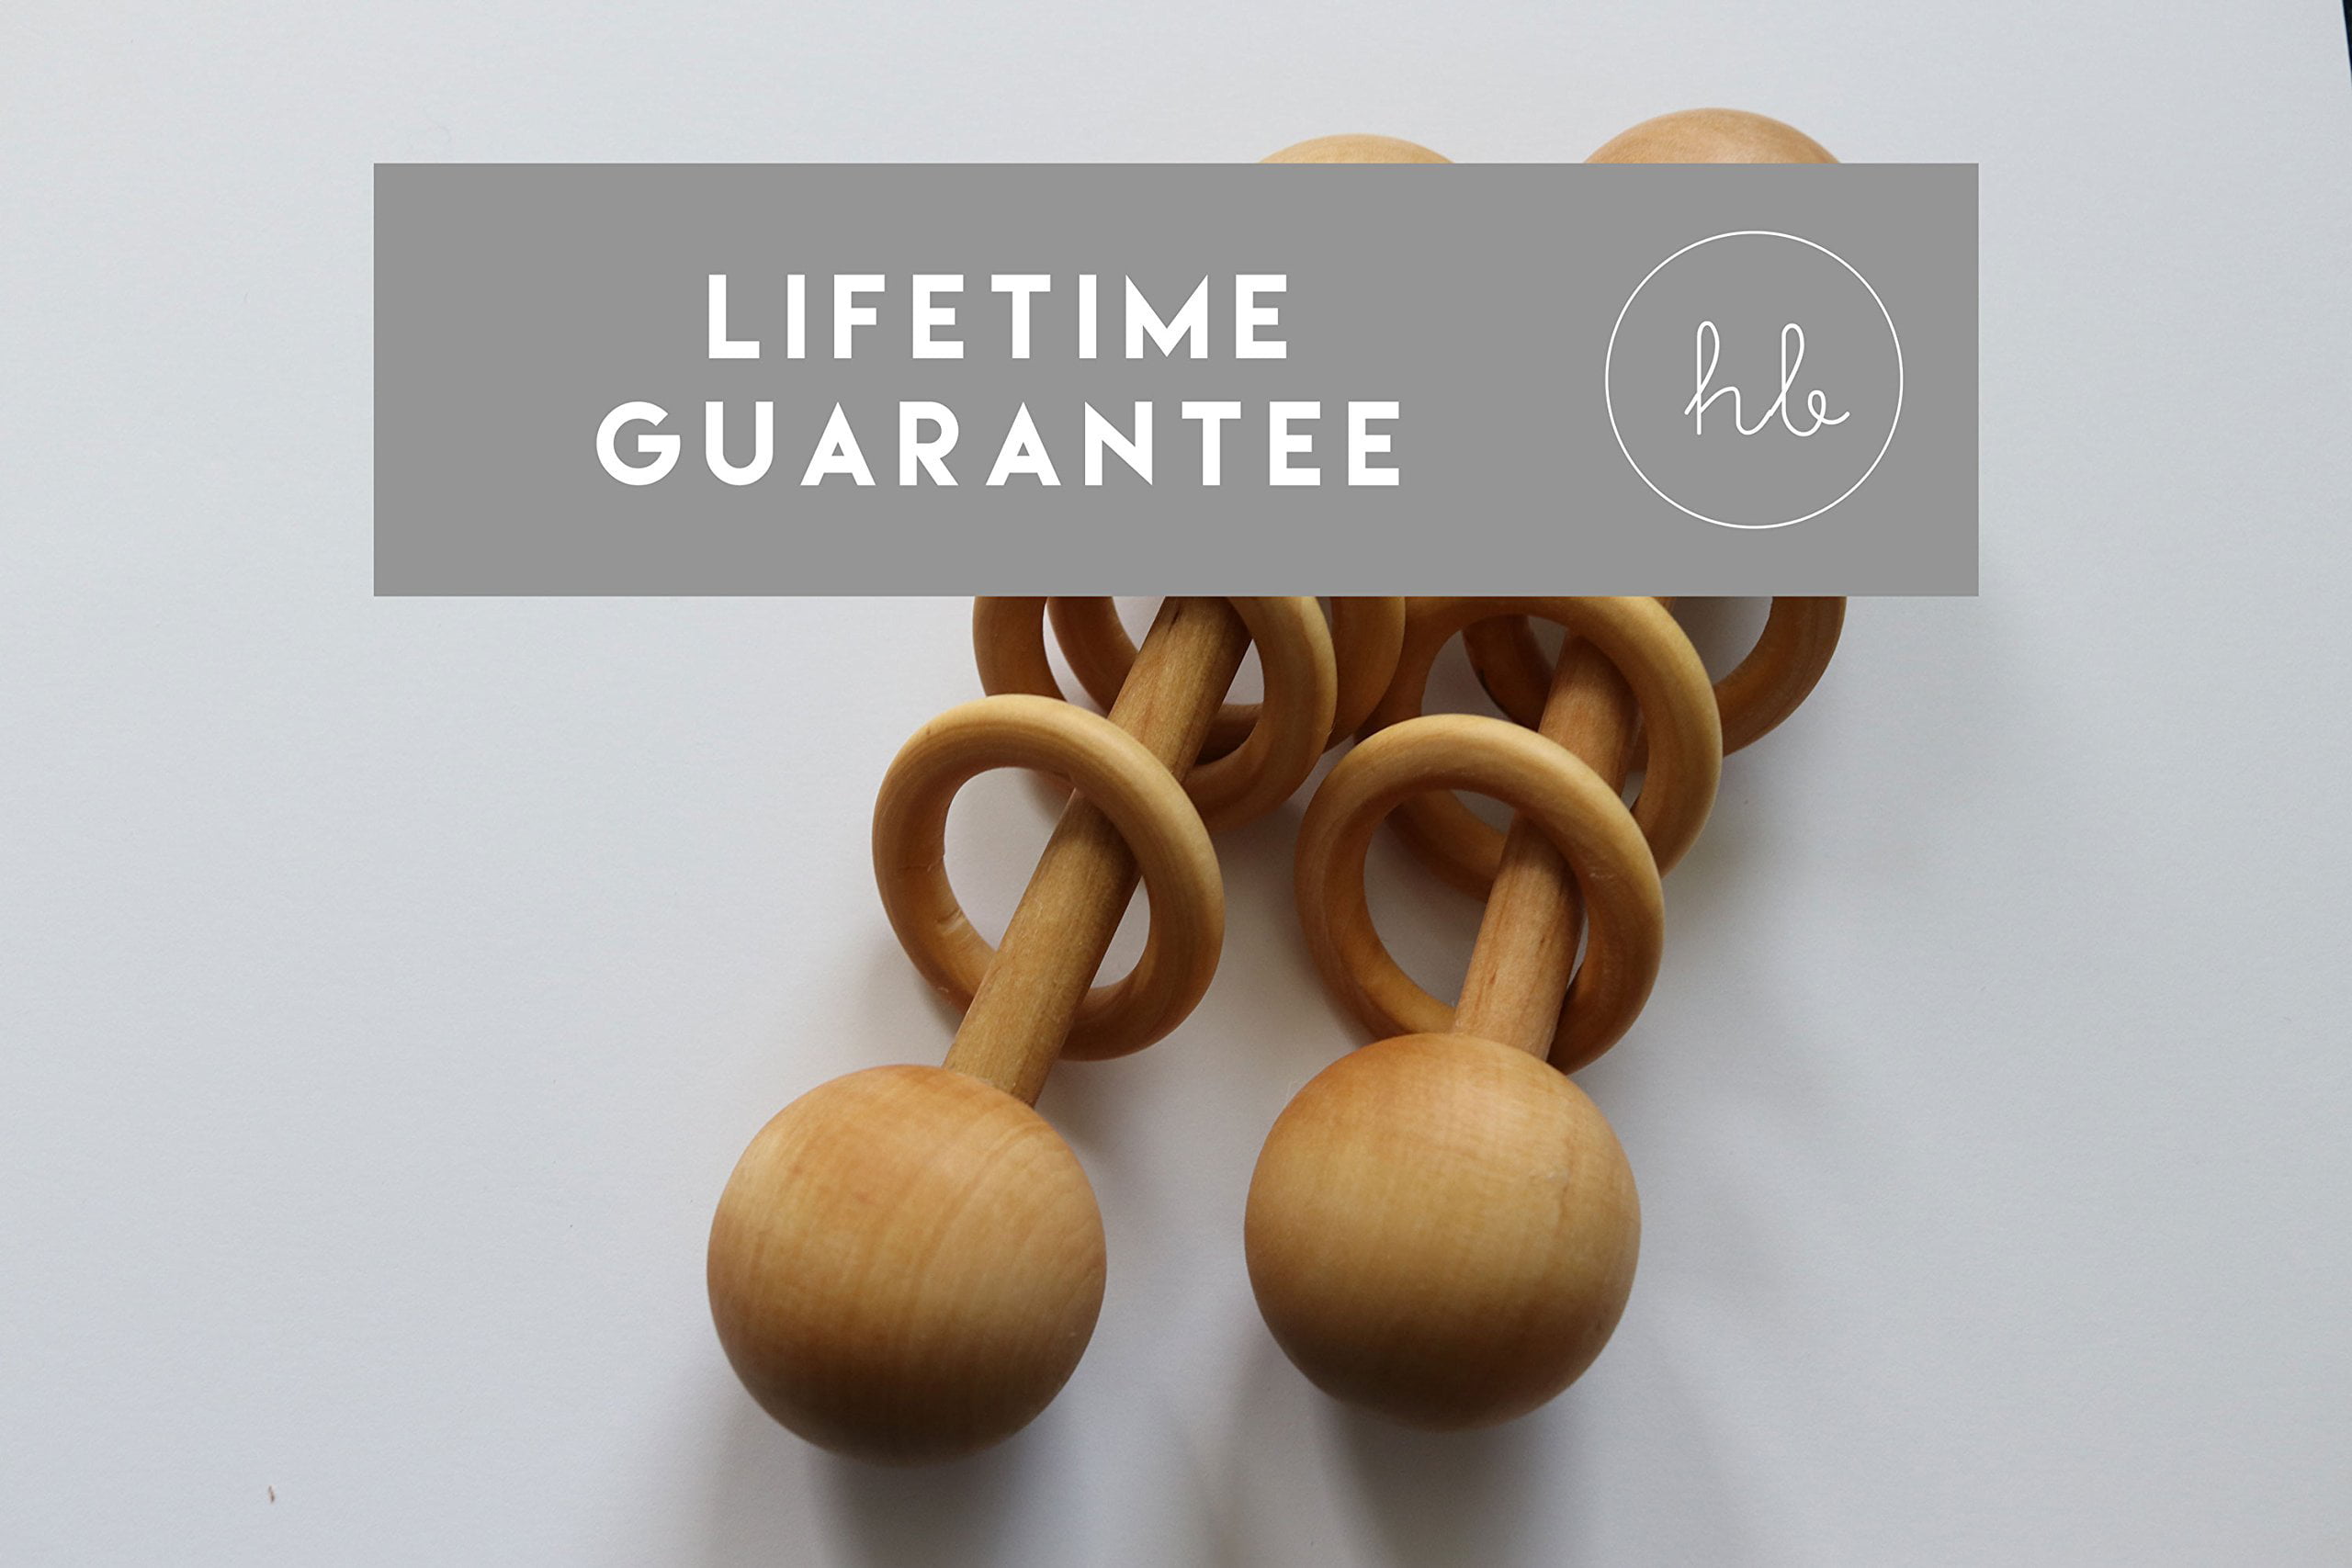 Perfect Montessori Grasping Teething Toy for Babies Wood Baby Rattle Teether by Homi Baby Handmade in The USA Sealed with Organic Virgin Coconut Oil & Beeswax 